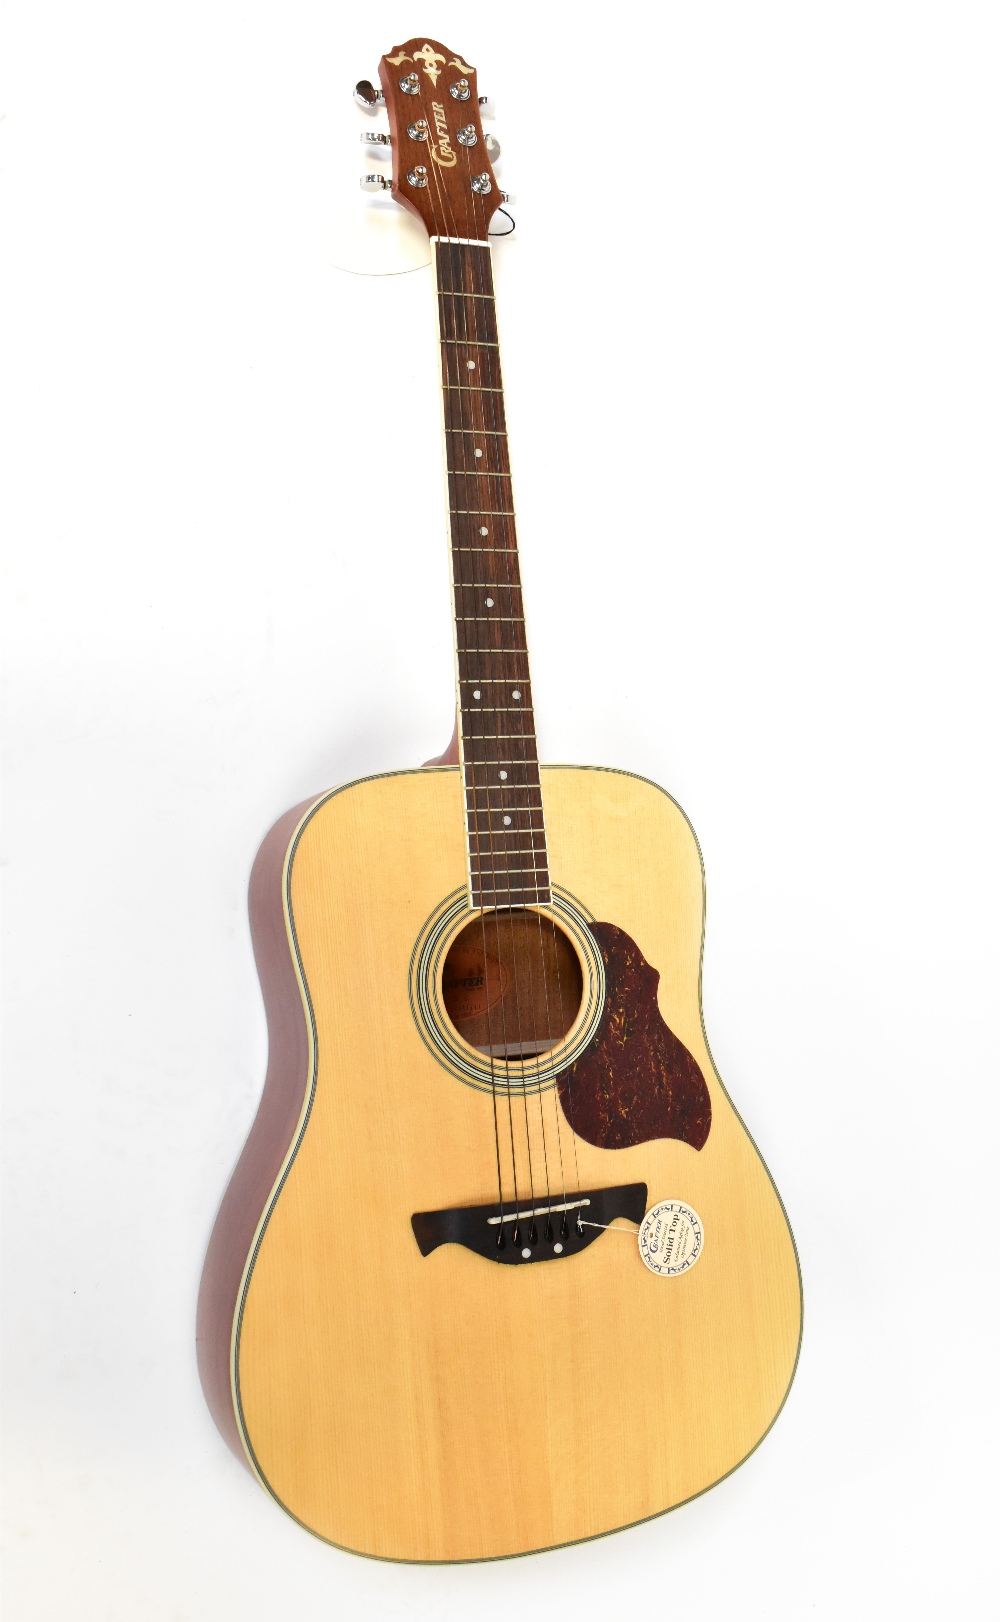 A Crafter acoustic guitar.